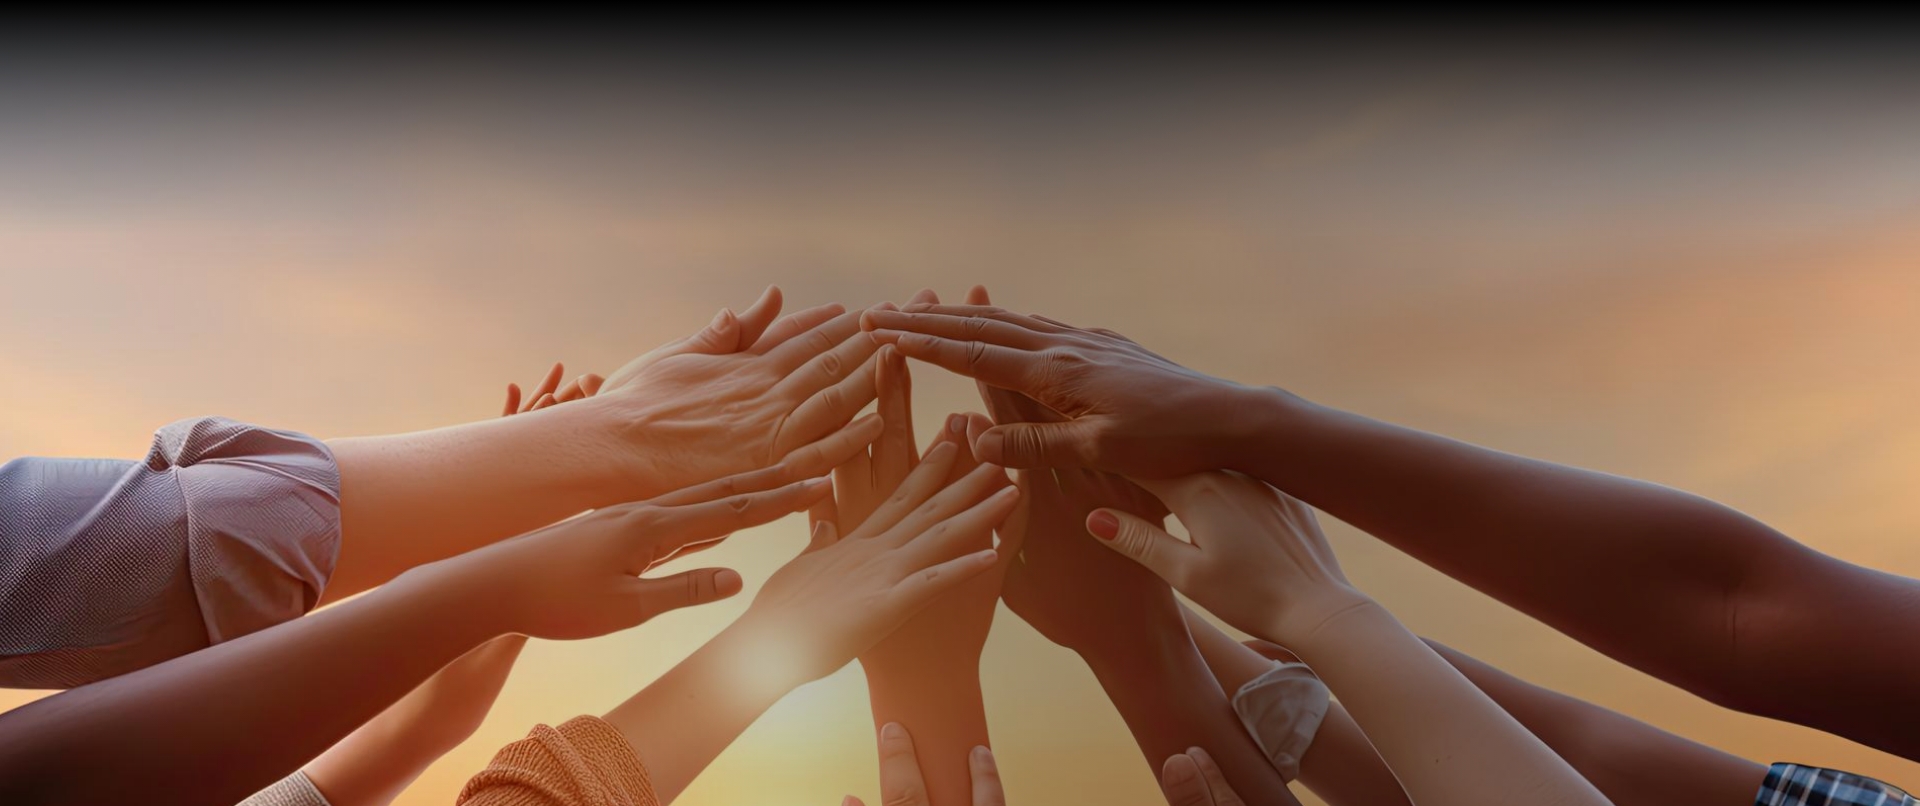 Many hands coming together and reaching upwards against an orange sky background.